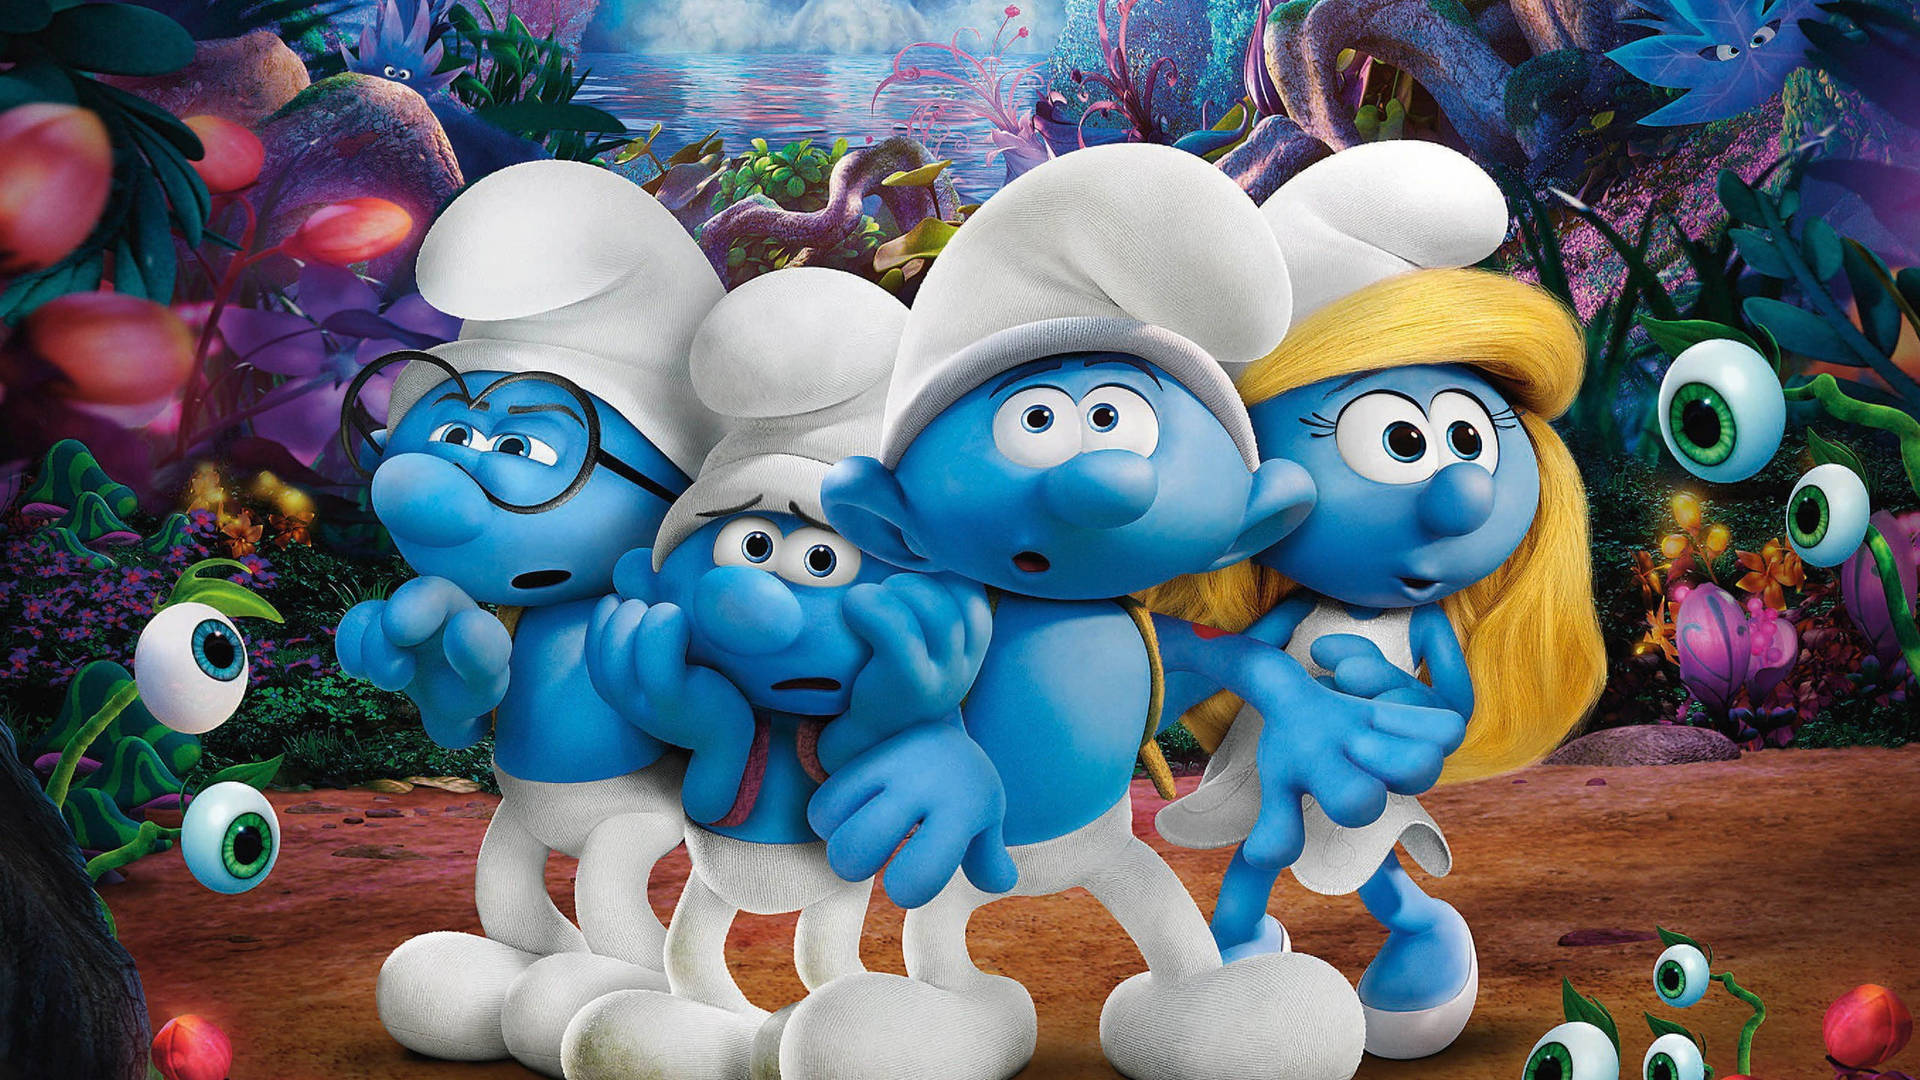 The Smurfs In The Lost Village